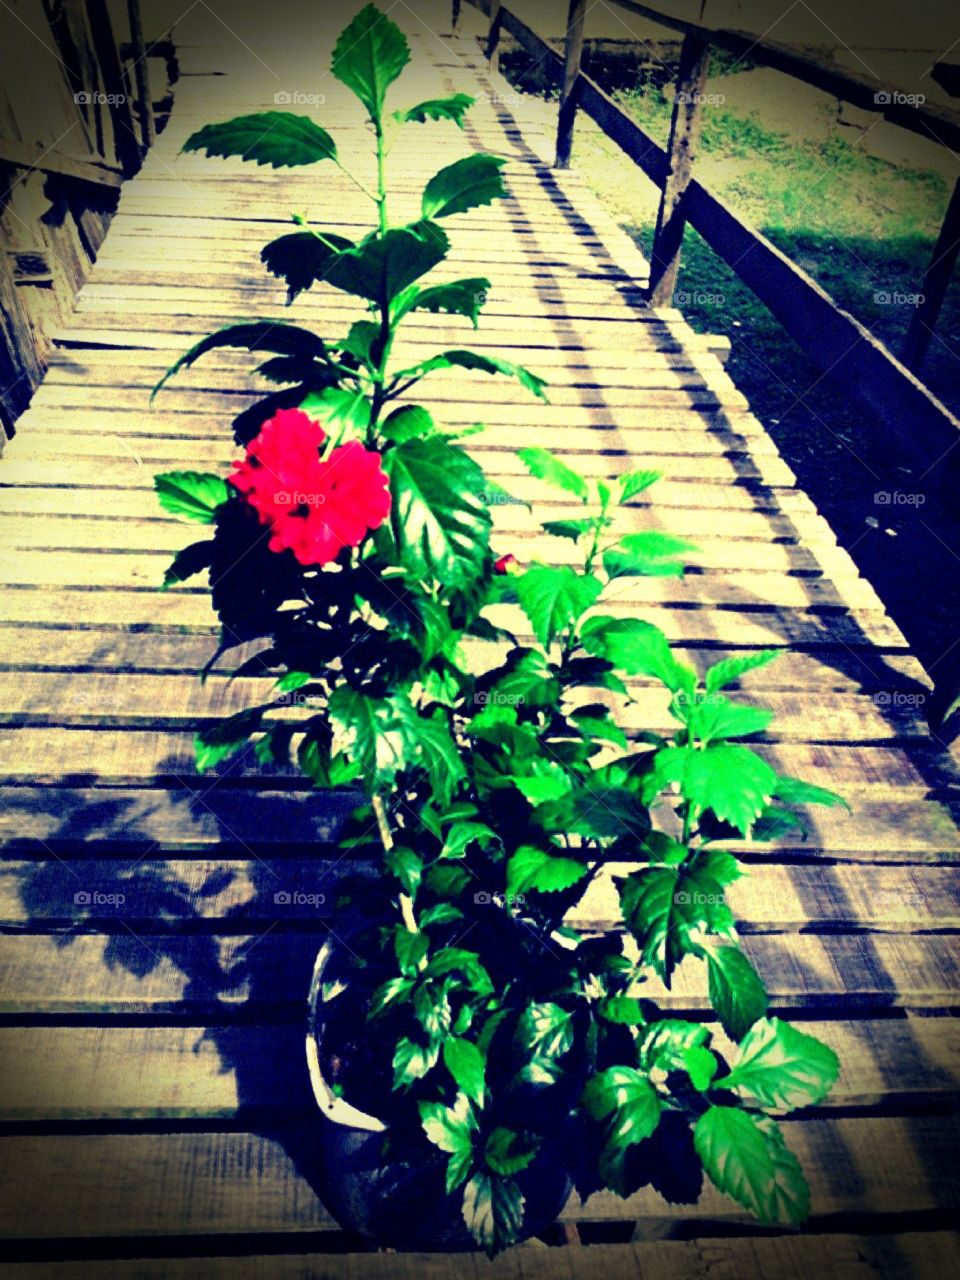 flower in my home